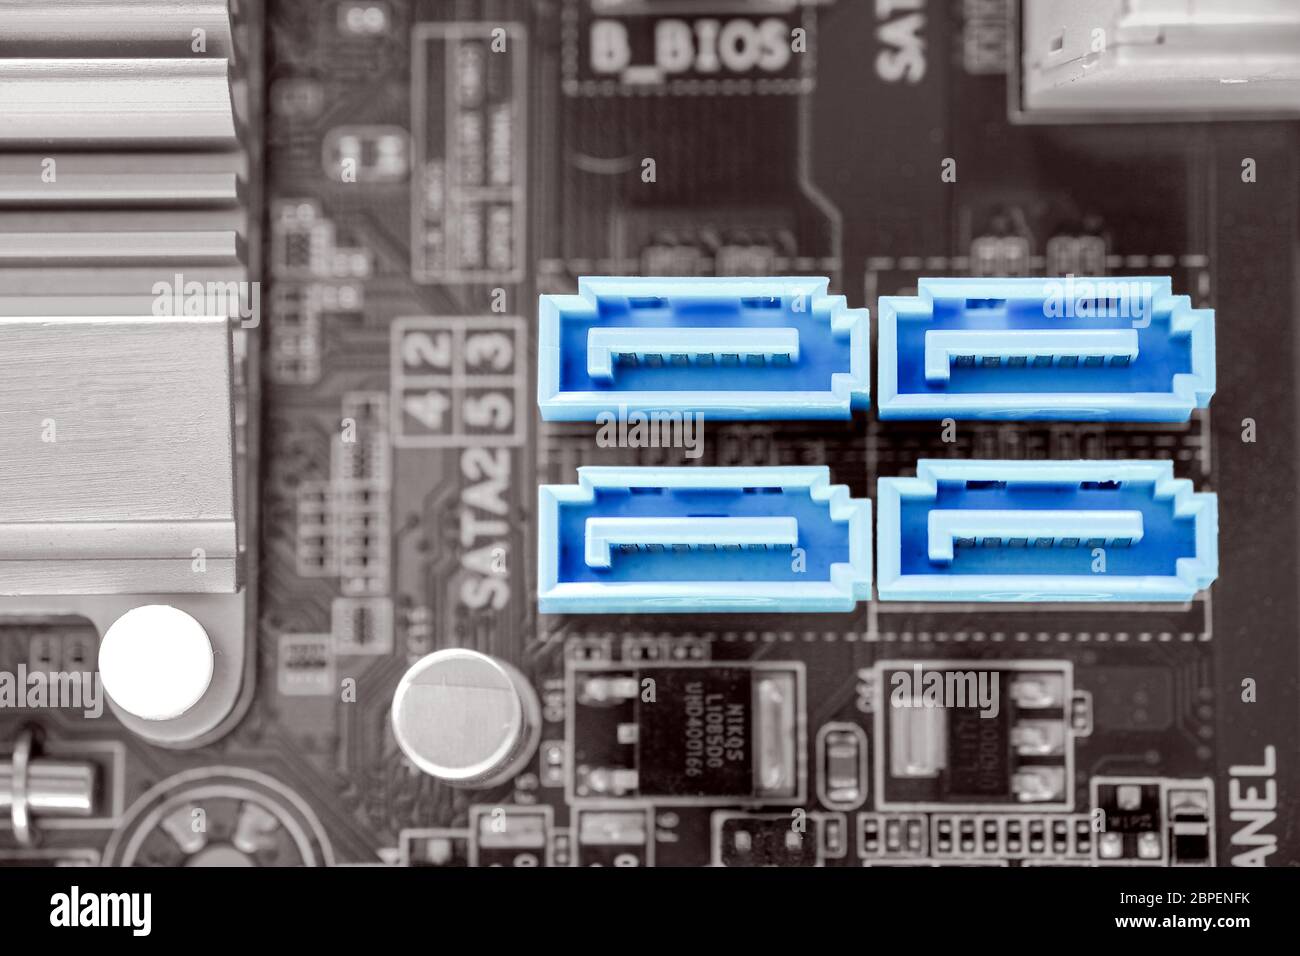 Blue color 4x SATA-II port in desktop PC motherboard on black and white color filter, SATA-II is a port for hard disk connectivity Stock Photo